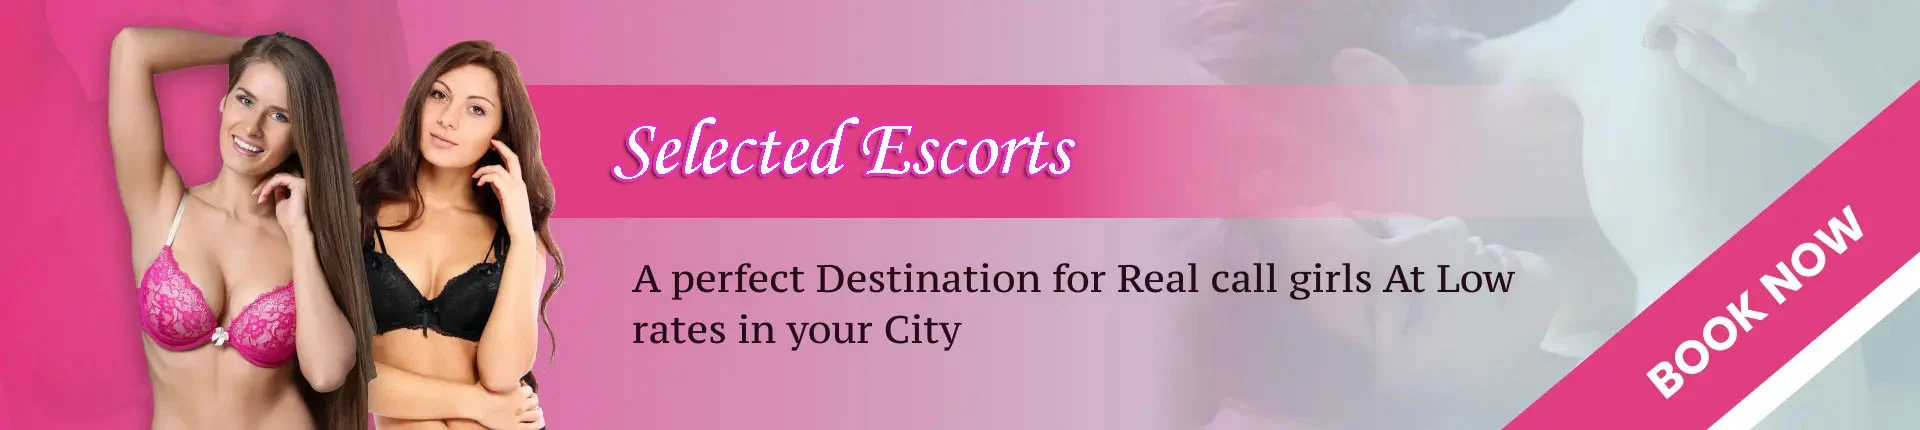 Mohyal Colony escort service bannner